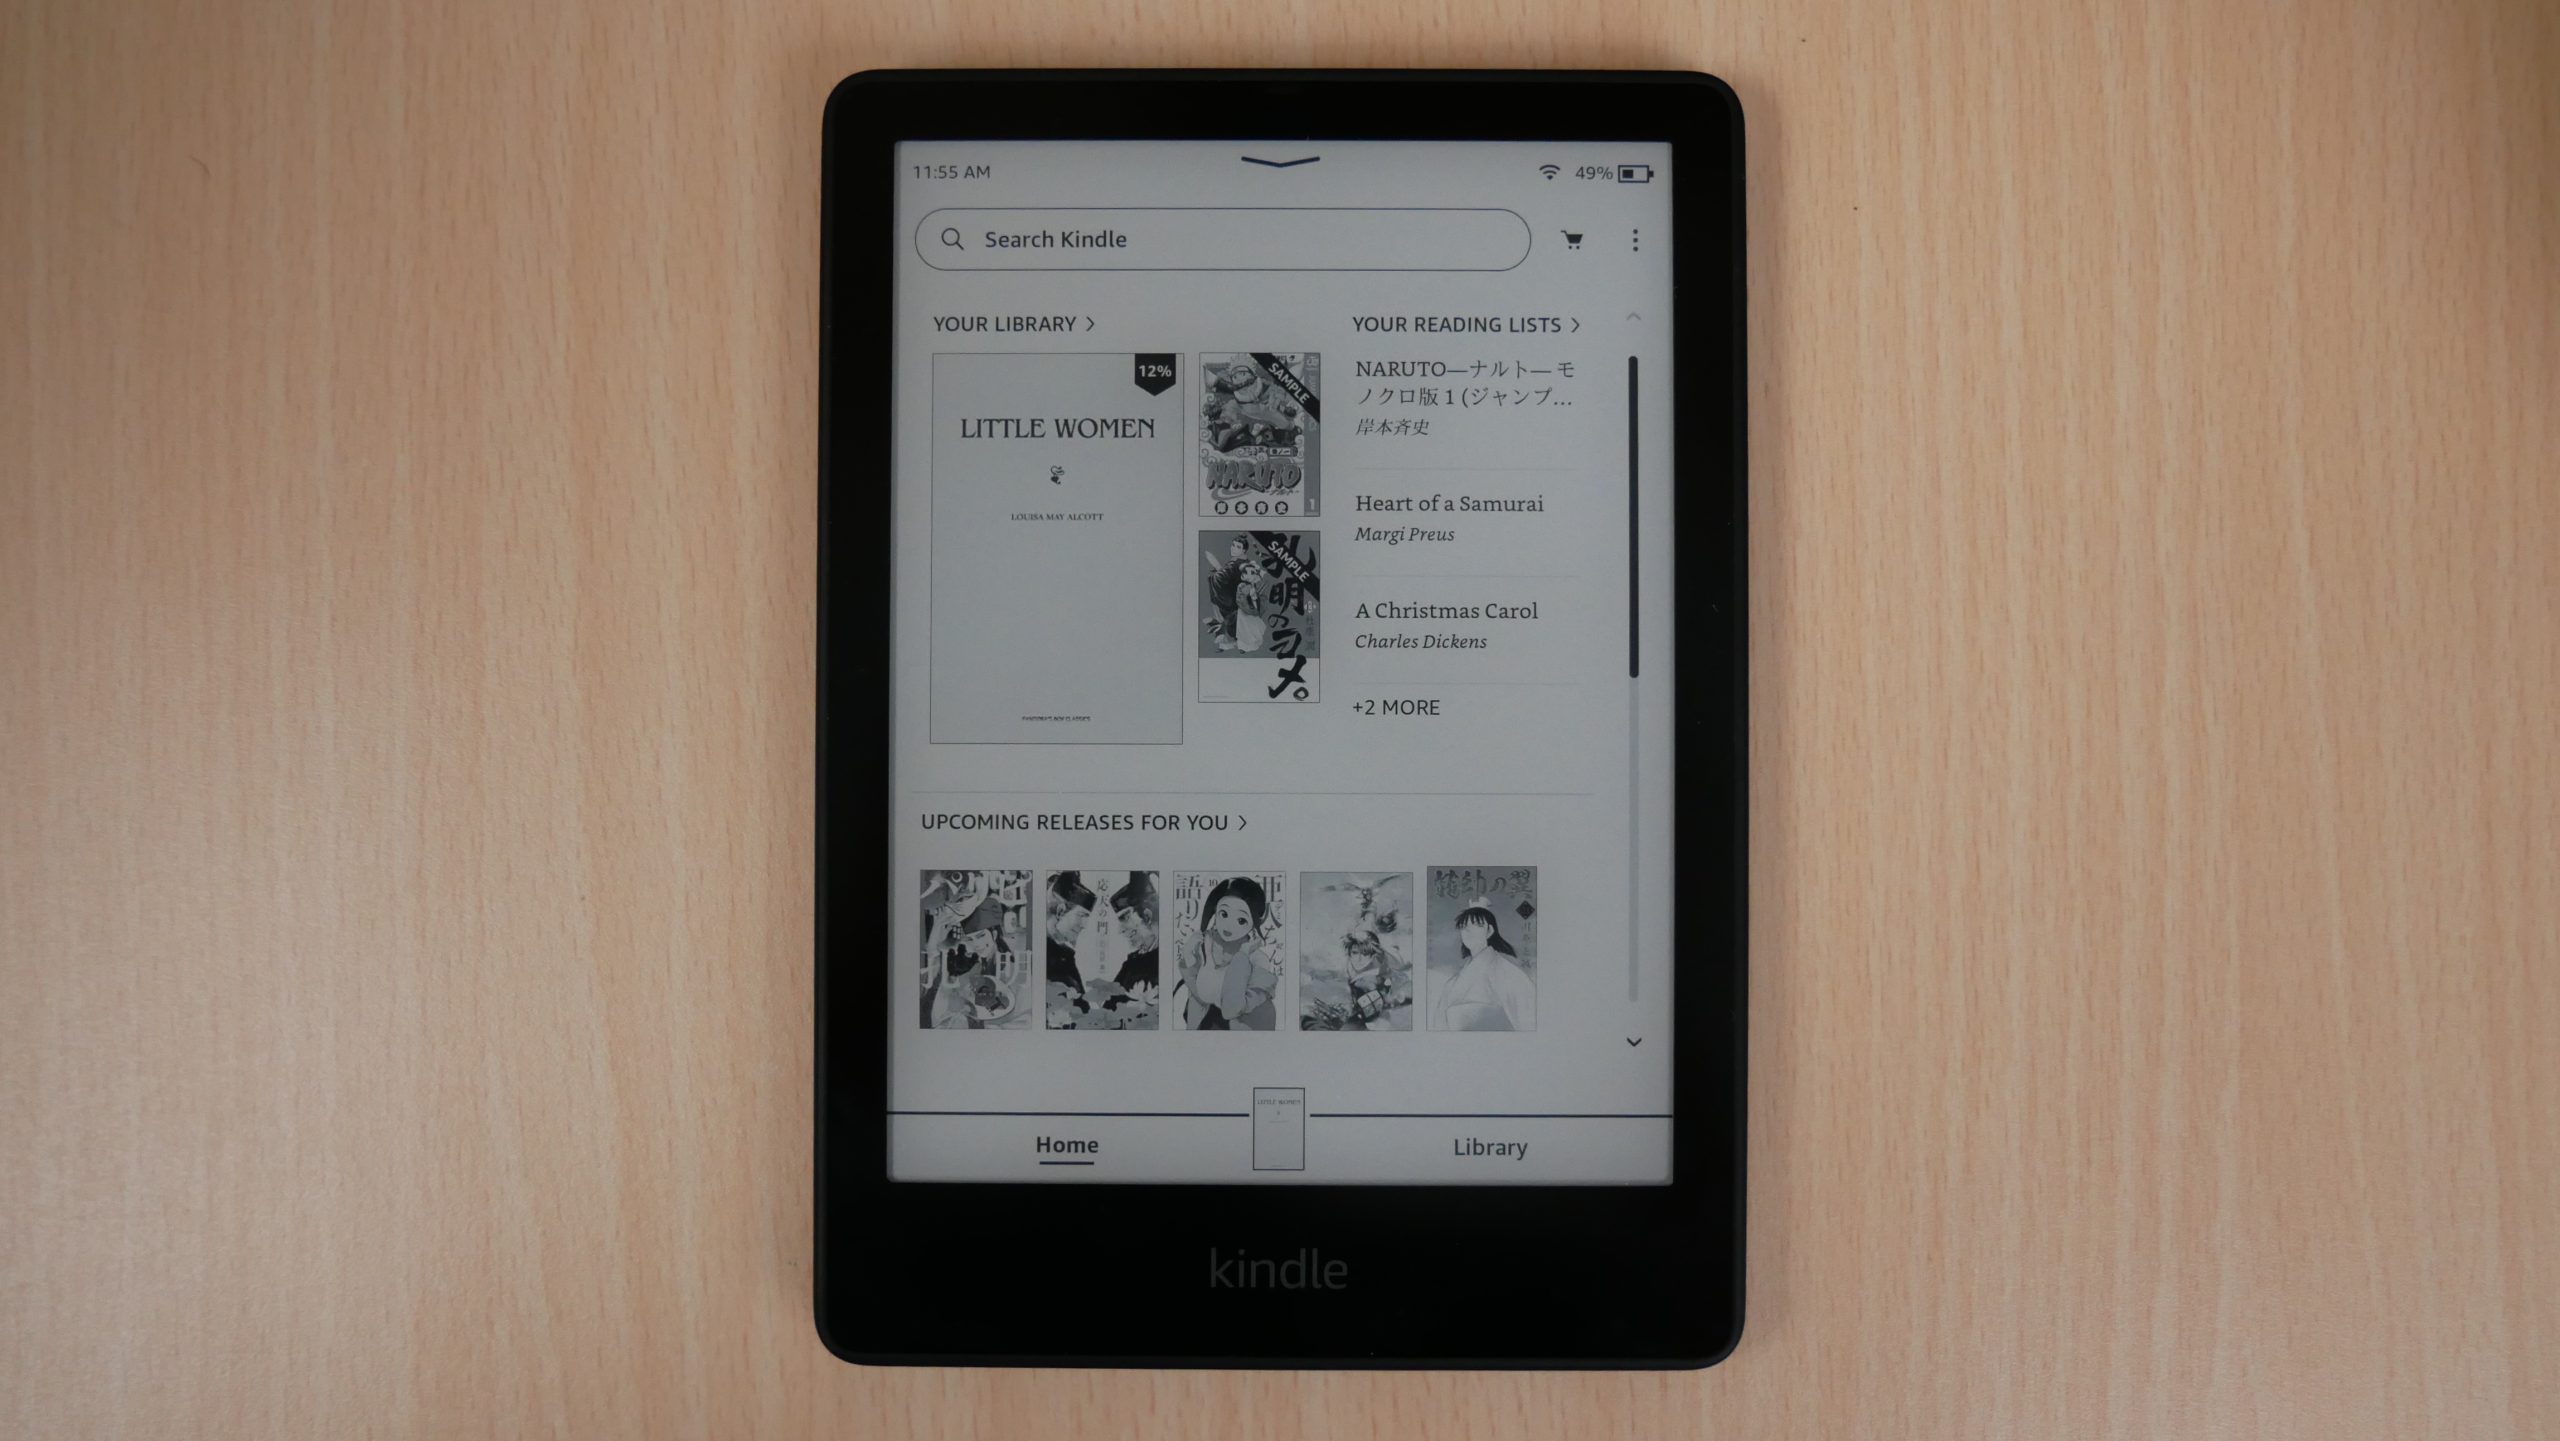 Kindle Paperwhite Signature Edition Review - Good e-Reader